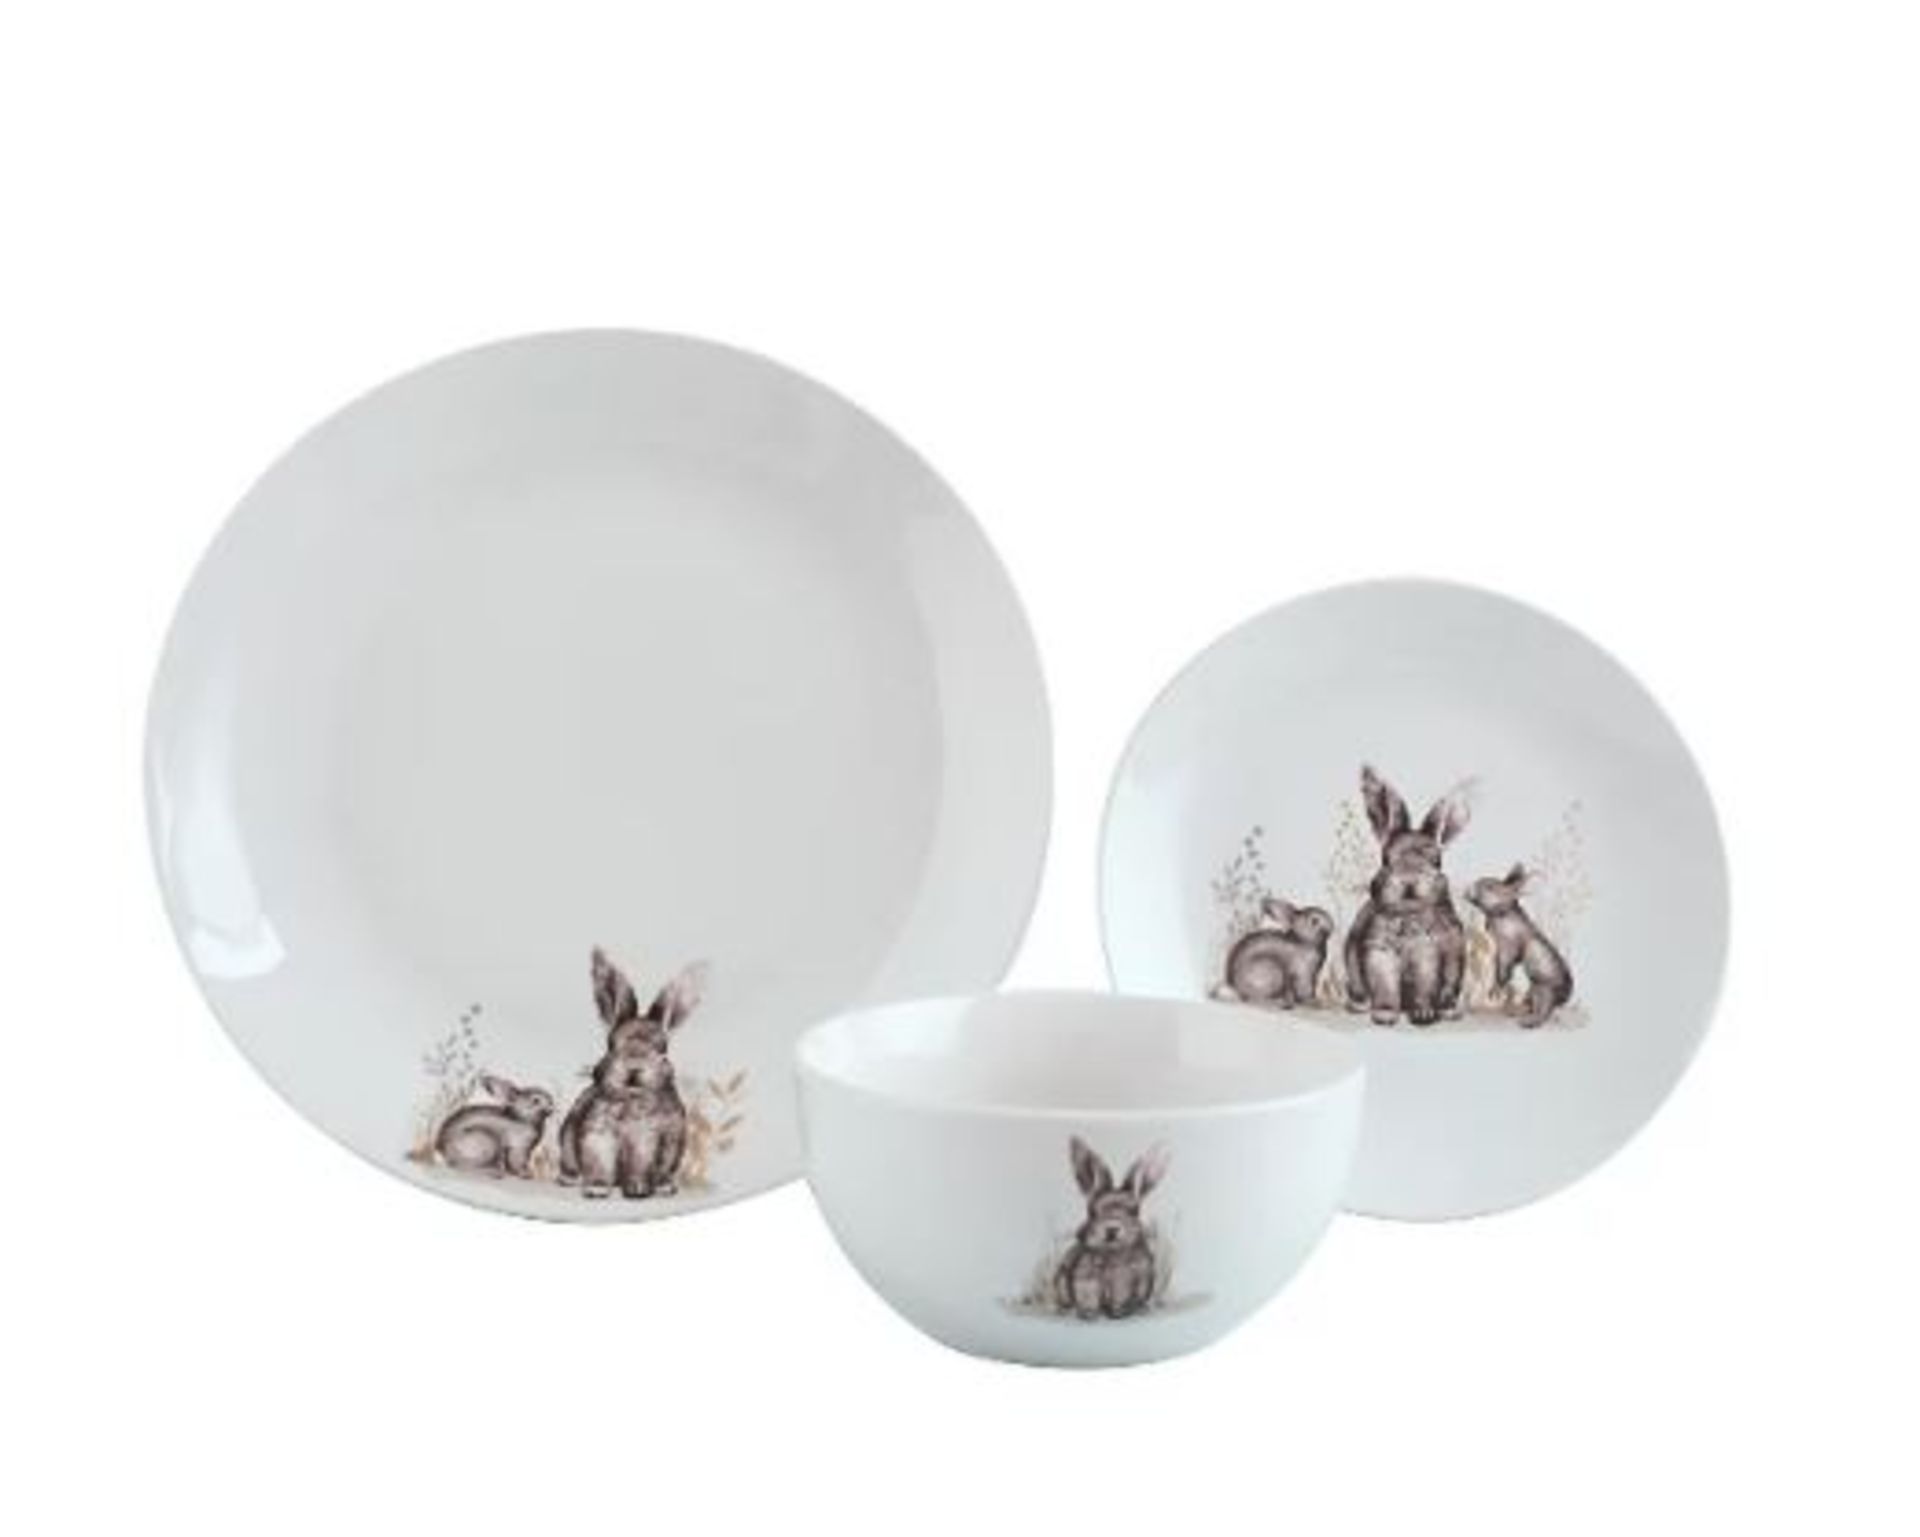 (15) Approx 85x Dinner Set Items. To Include 12 Piece Bunny Porcelain. 11 Piece Floral Porcelain & - Image 2 of 14